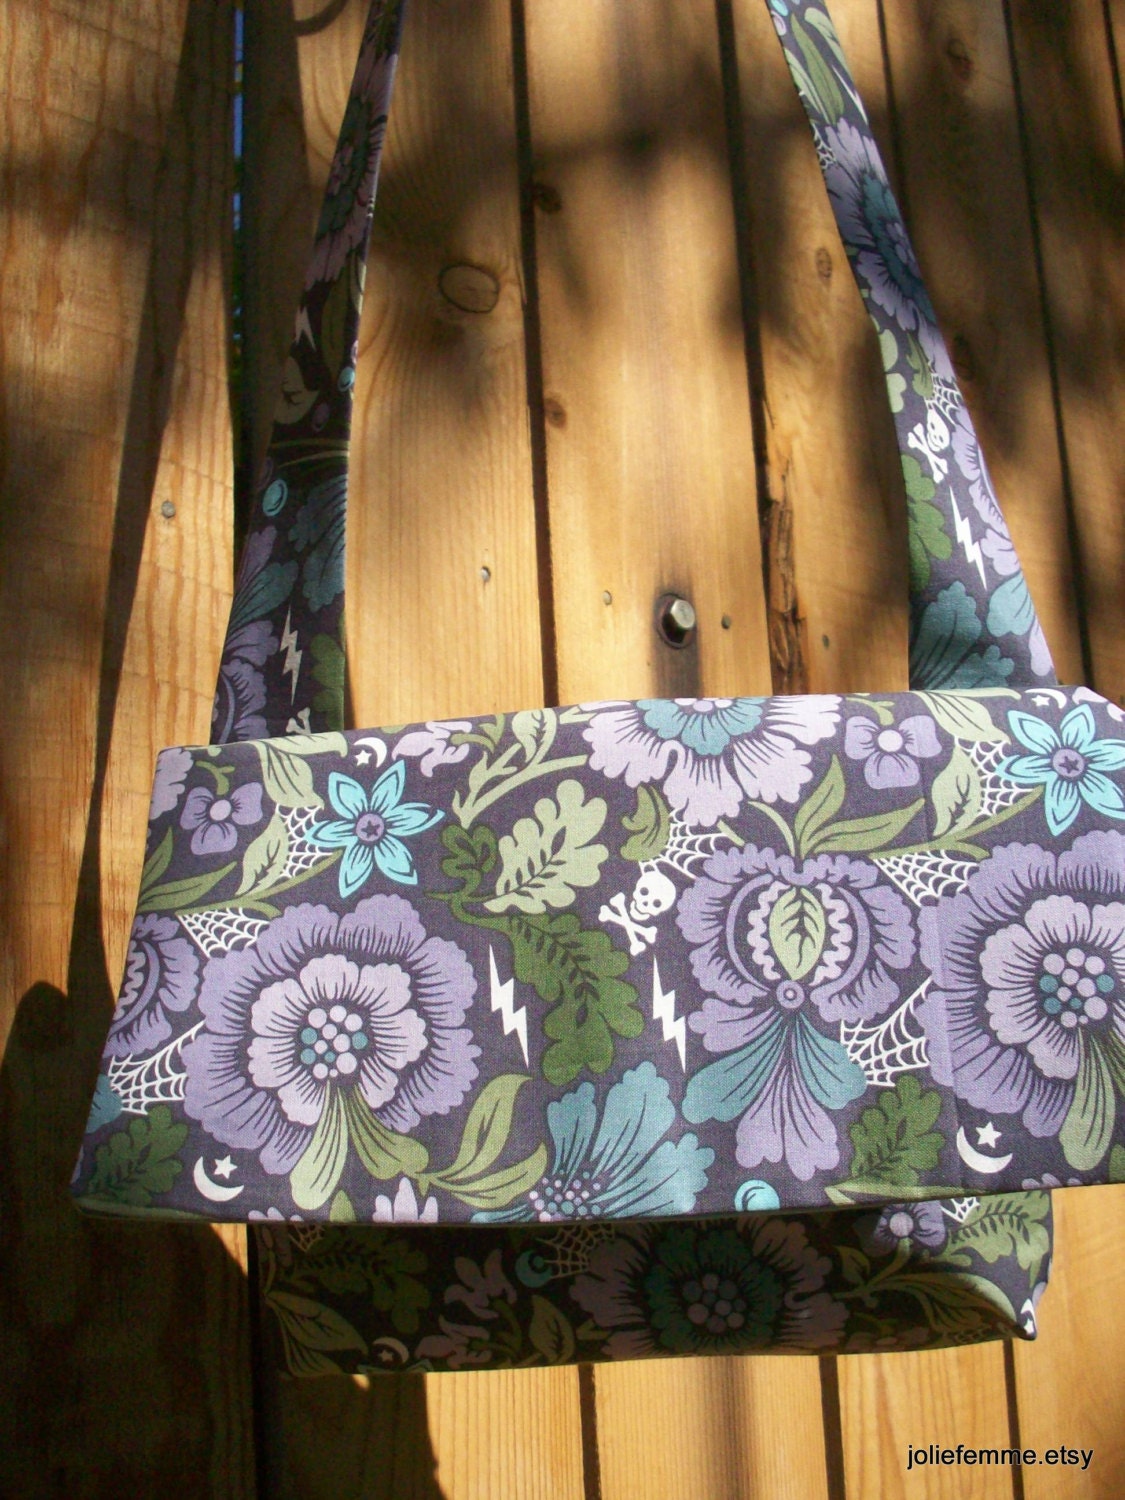 Nightshade Floral Purple and Gray  Envelope Cross Body Bag with Shoulder Strap Lightweight - joliefemme